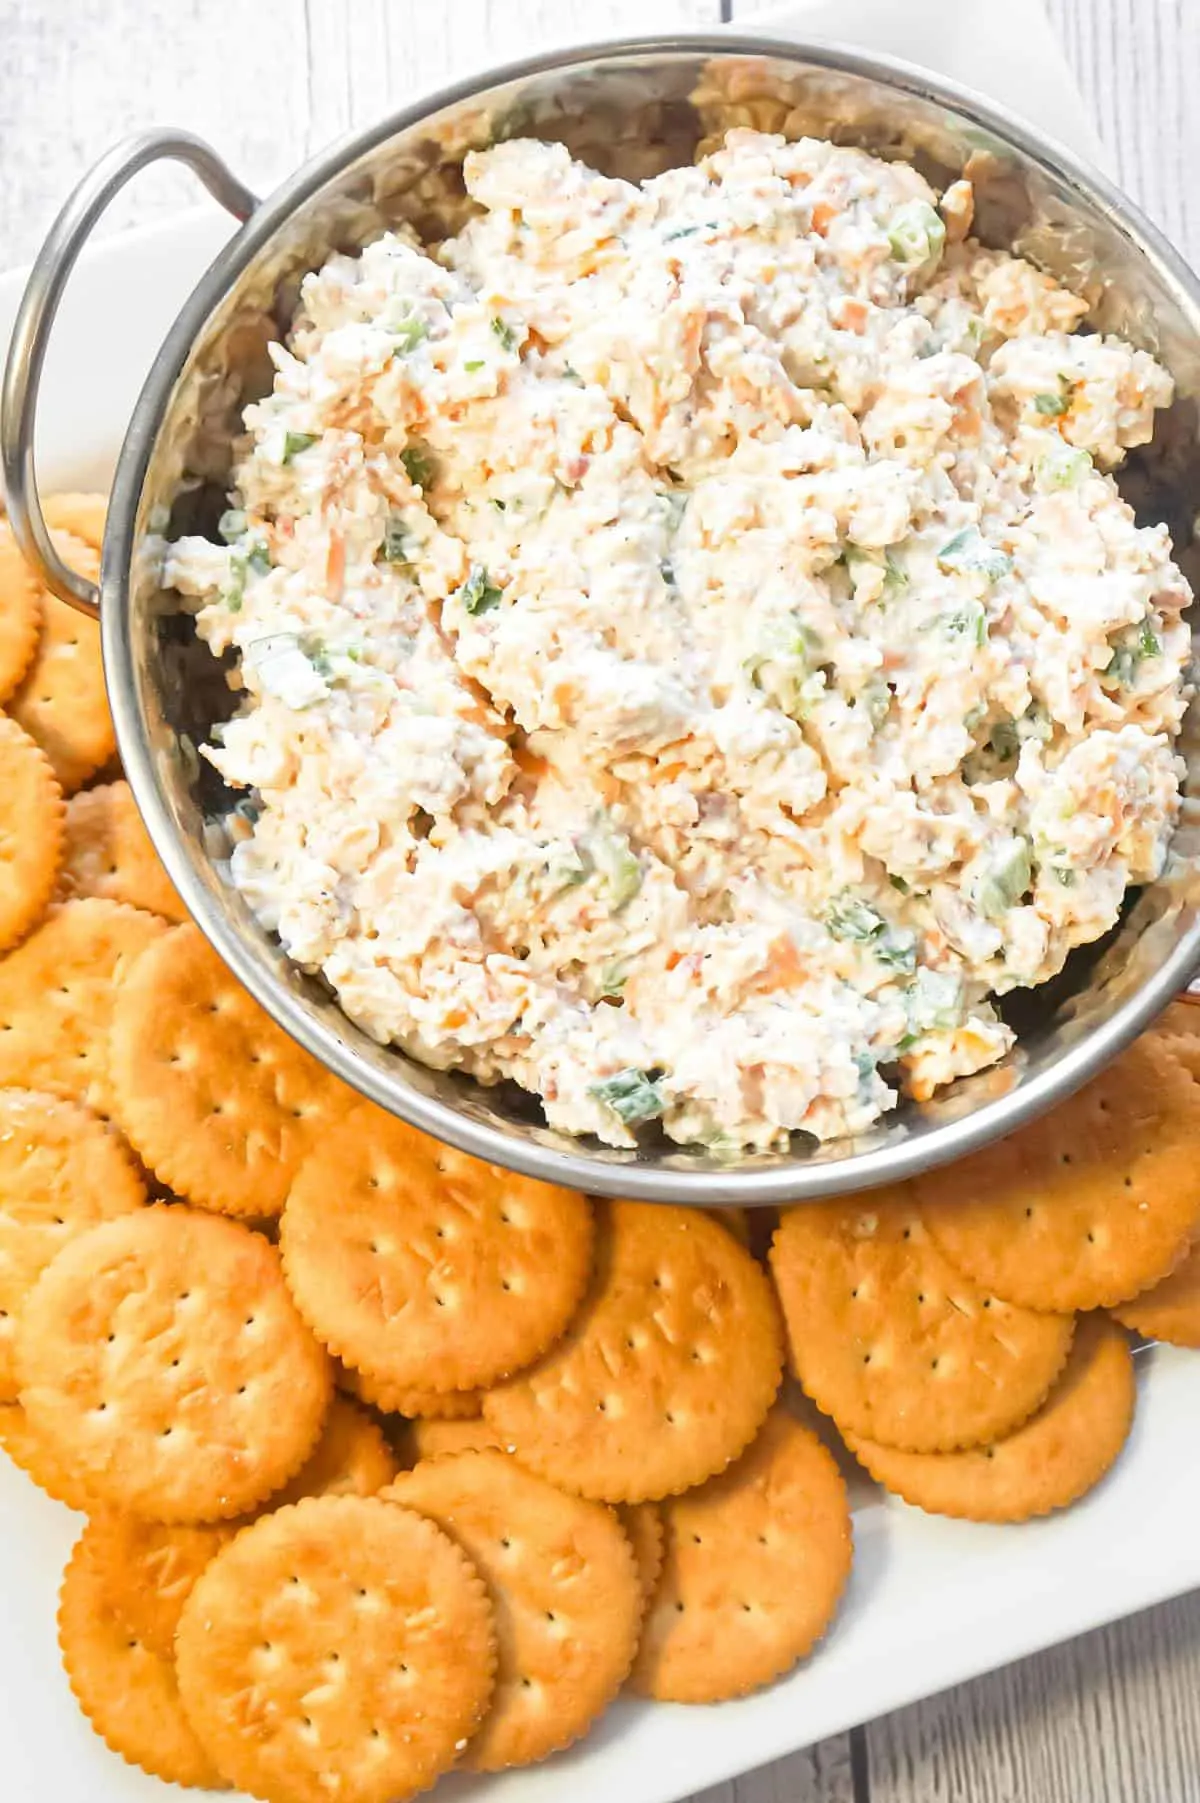 Bacon Cheddar Chicken Salad Dip is a delicious cold dip recipe loaded with mayo, cream cheese, canned chicken, crumbled bacon, chopped green onions and shredded cheddar cheese.